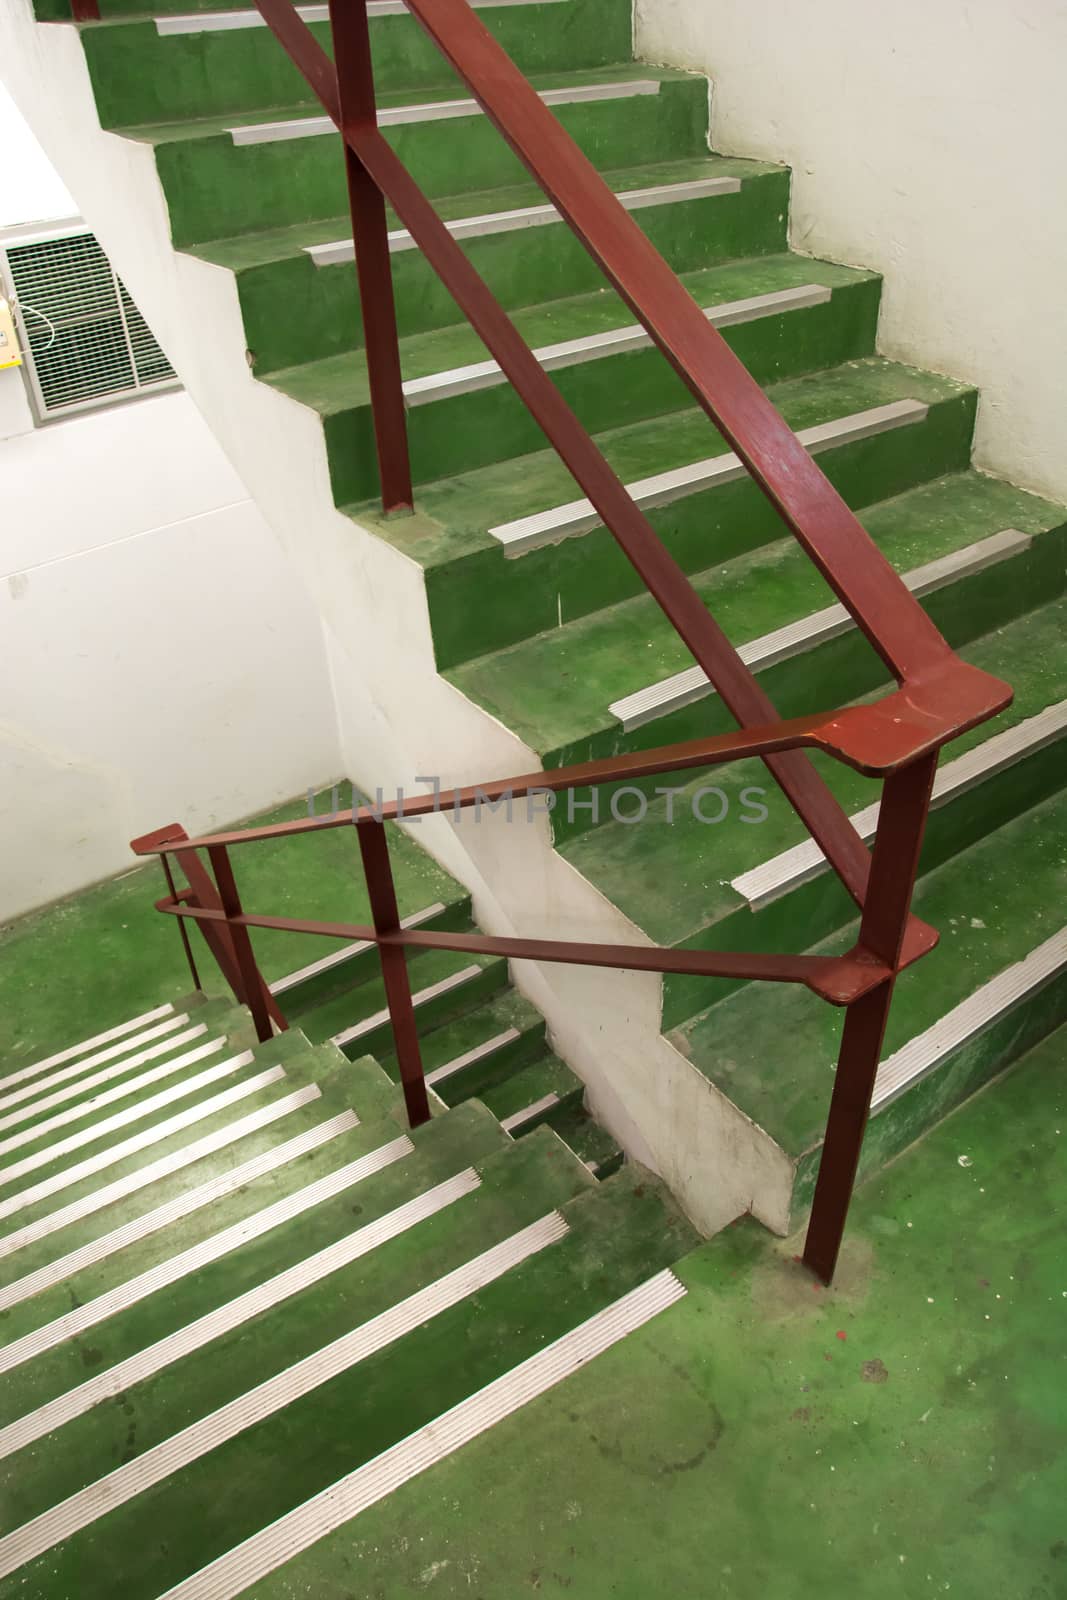 Open green stairwell in a building